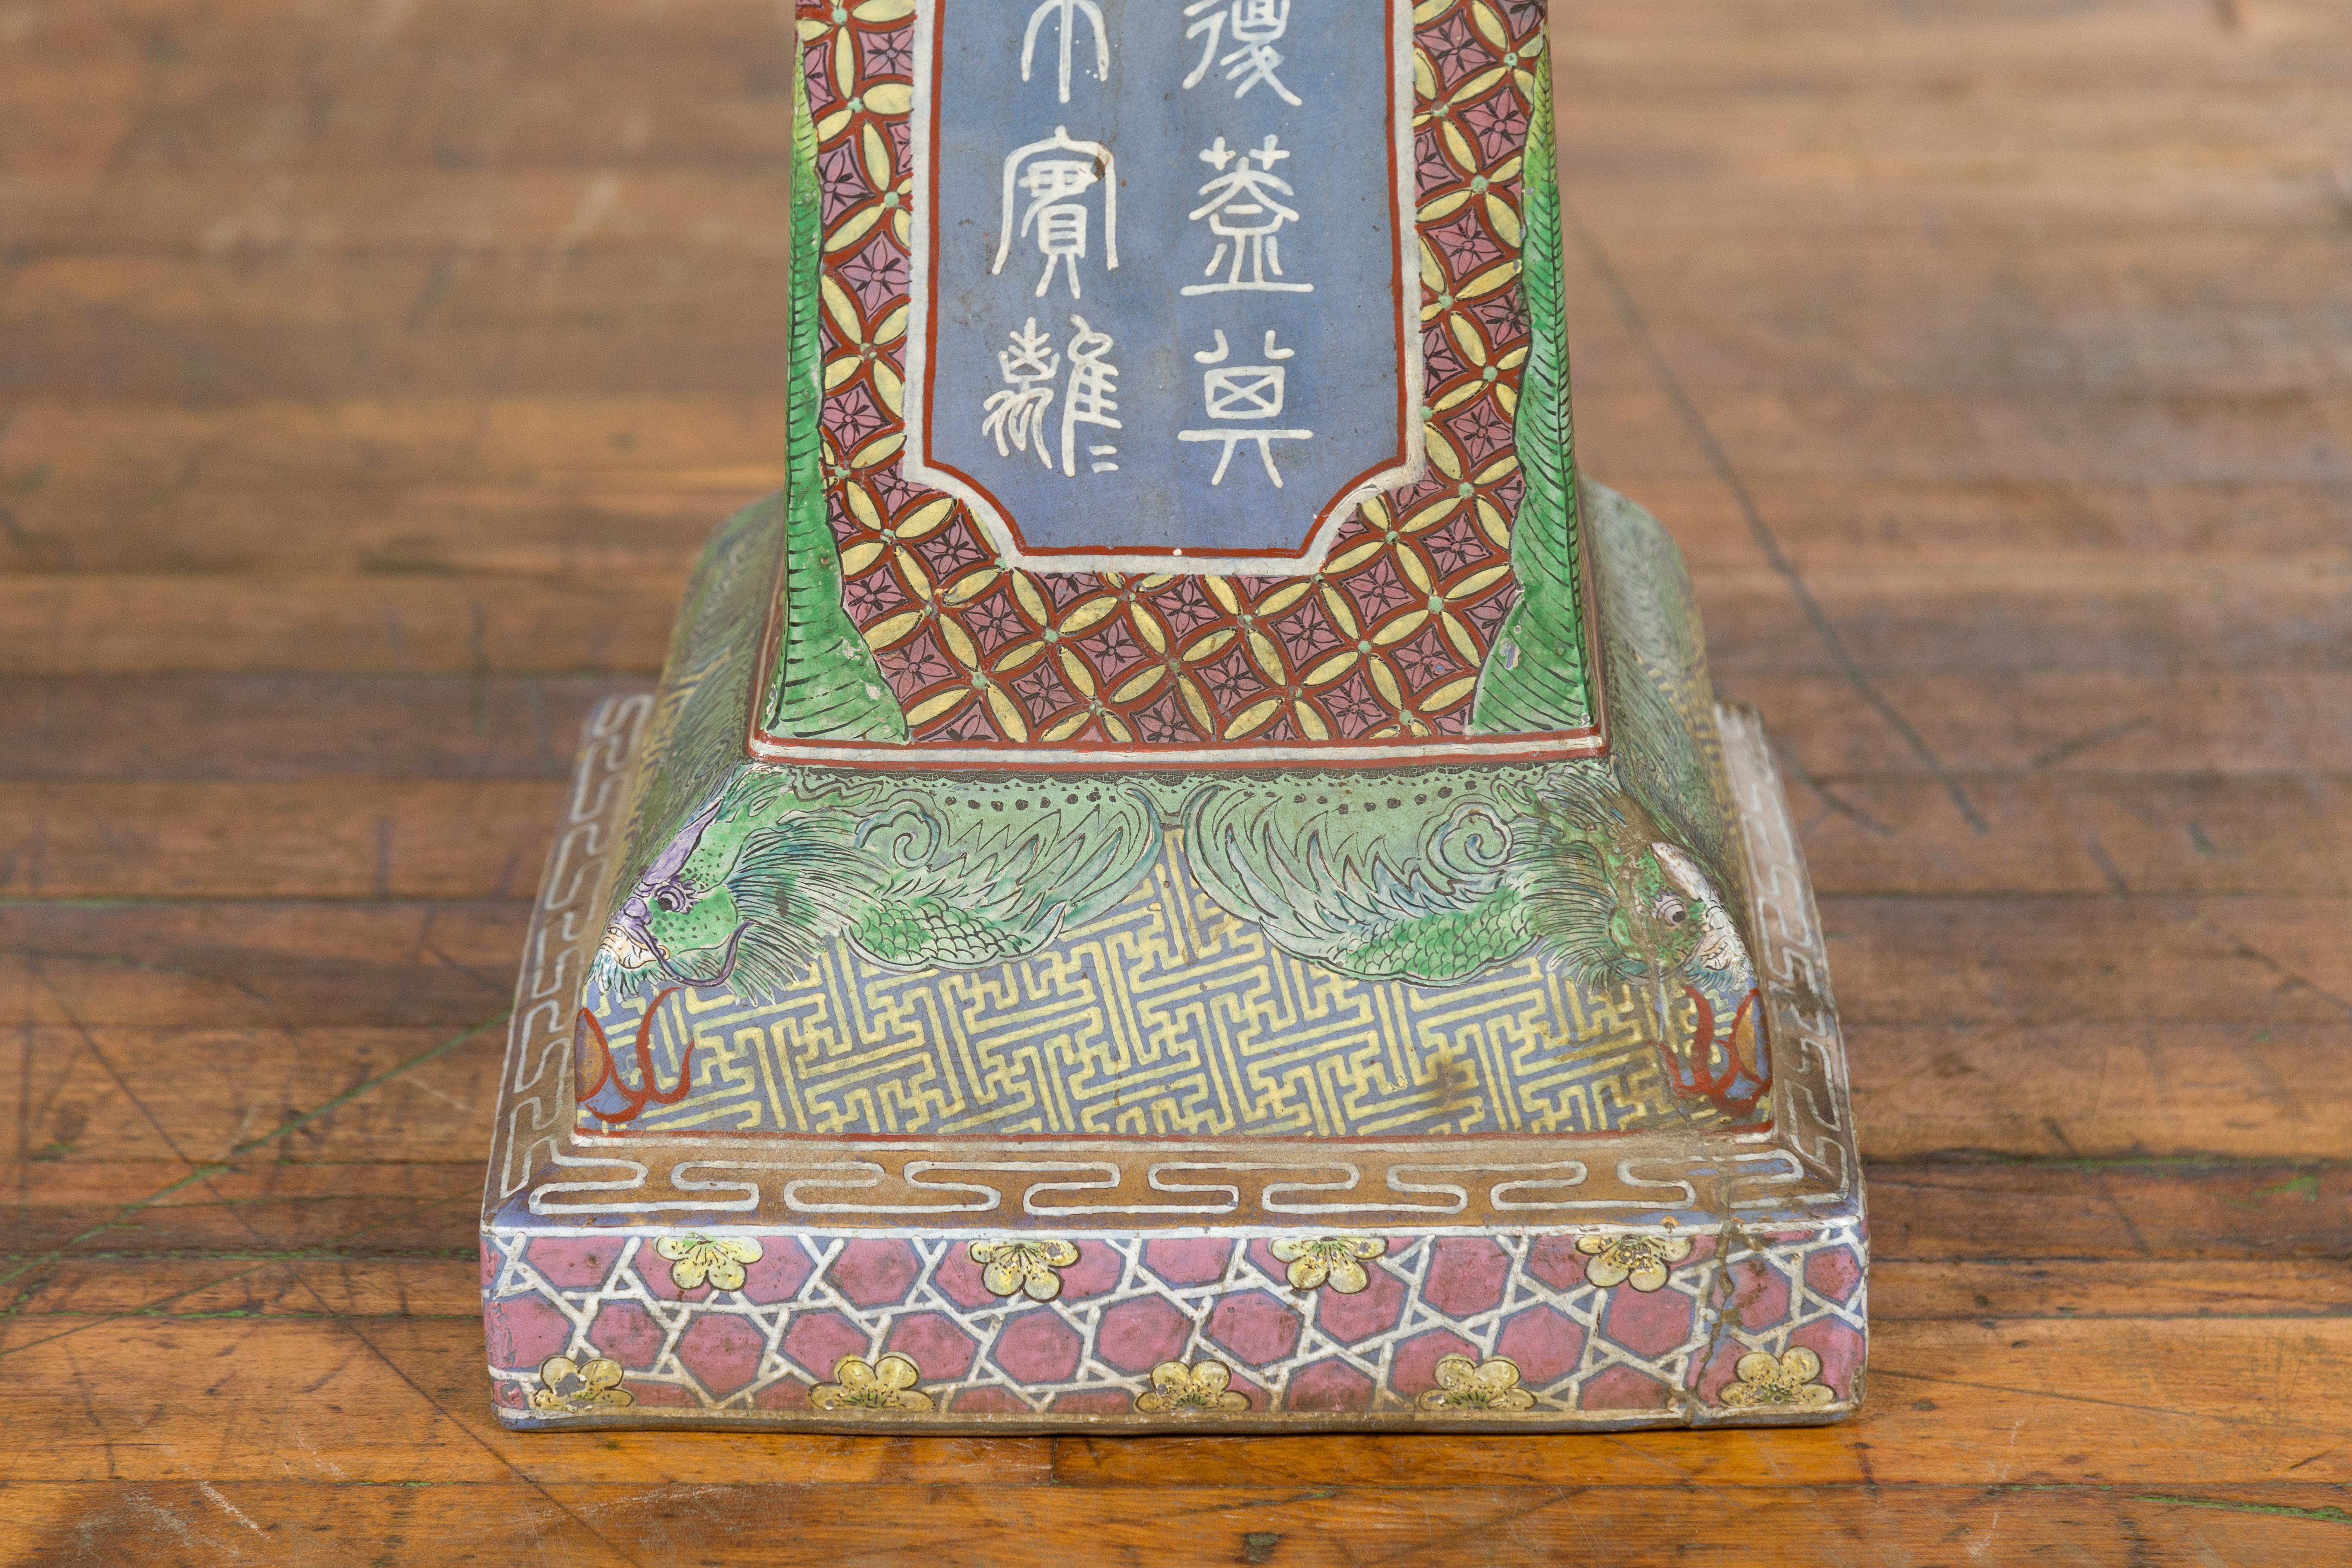 Chinese Vintage Ceramic Pedestal Stand with Hand-Painted Calligraphy and Figures For Sale 1